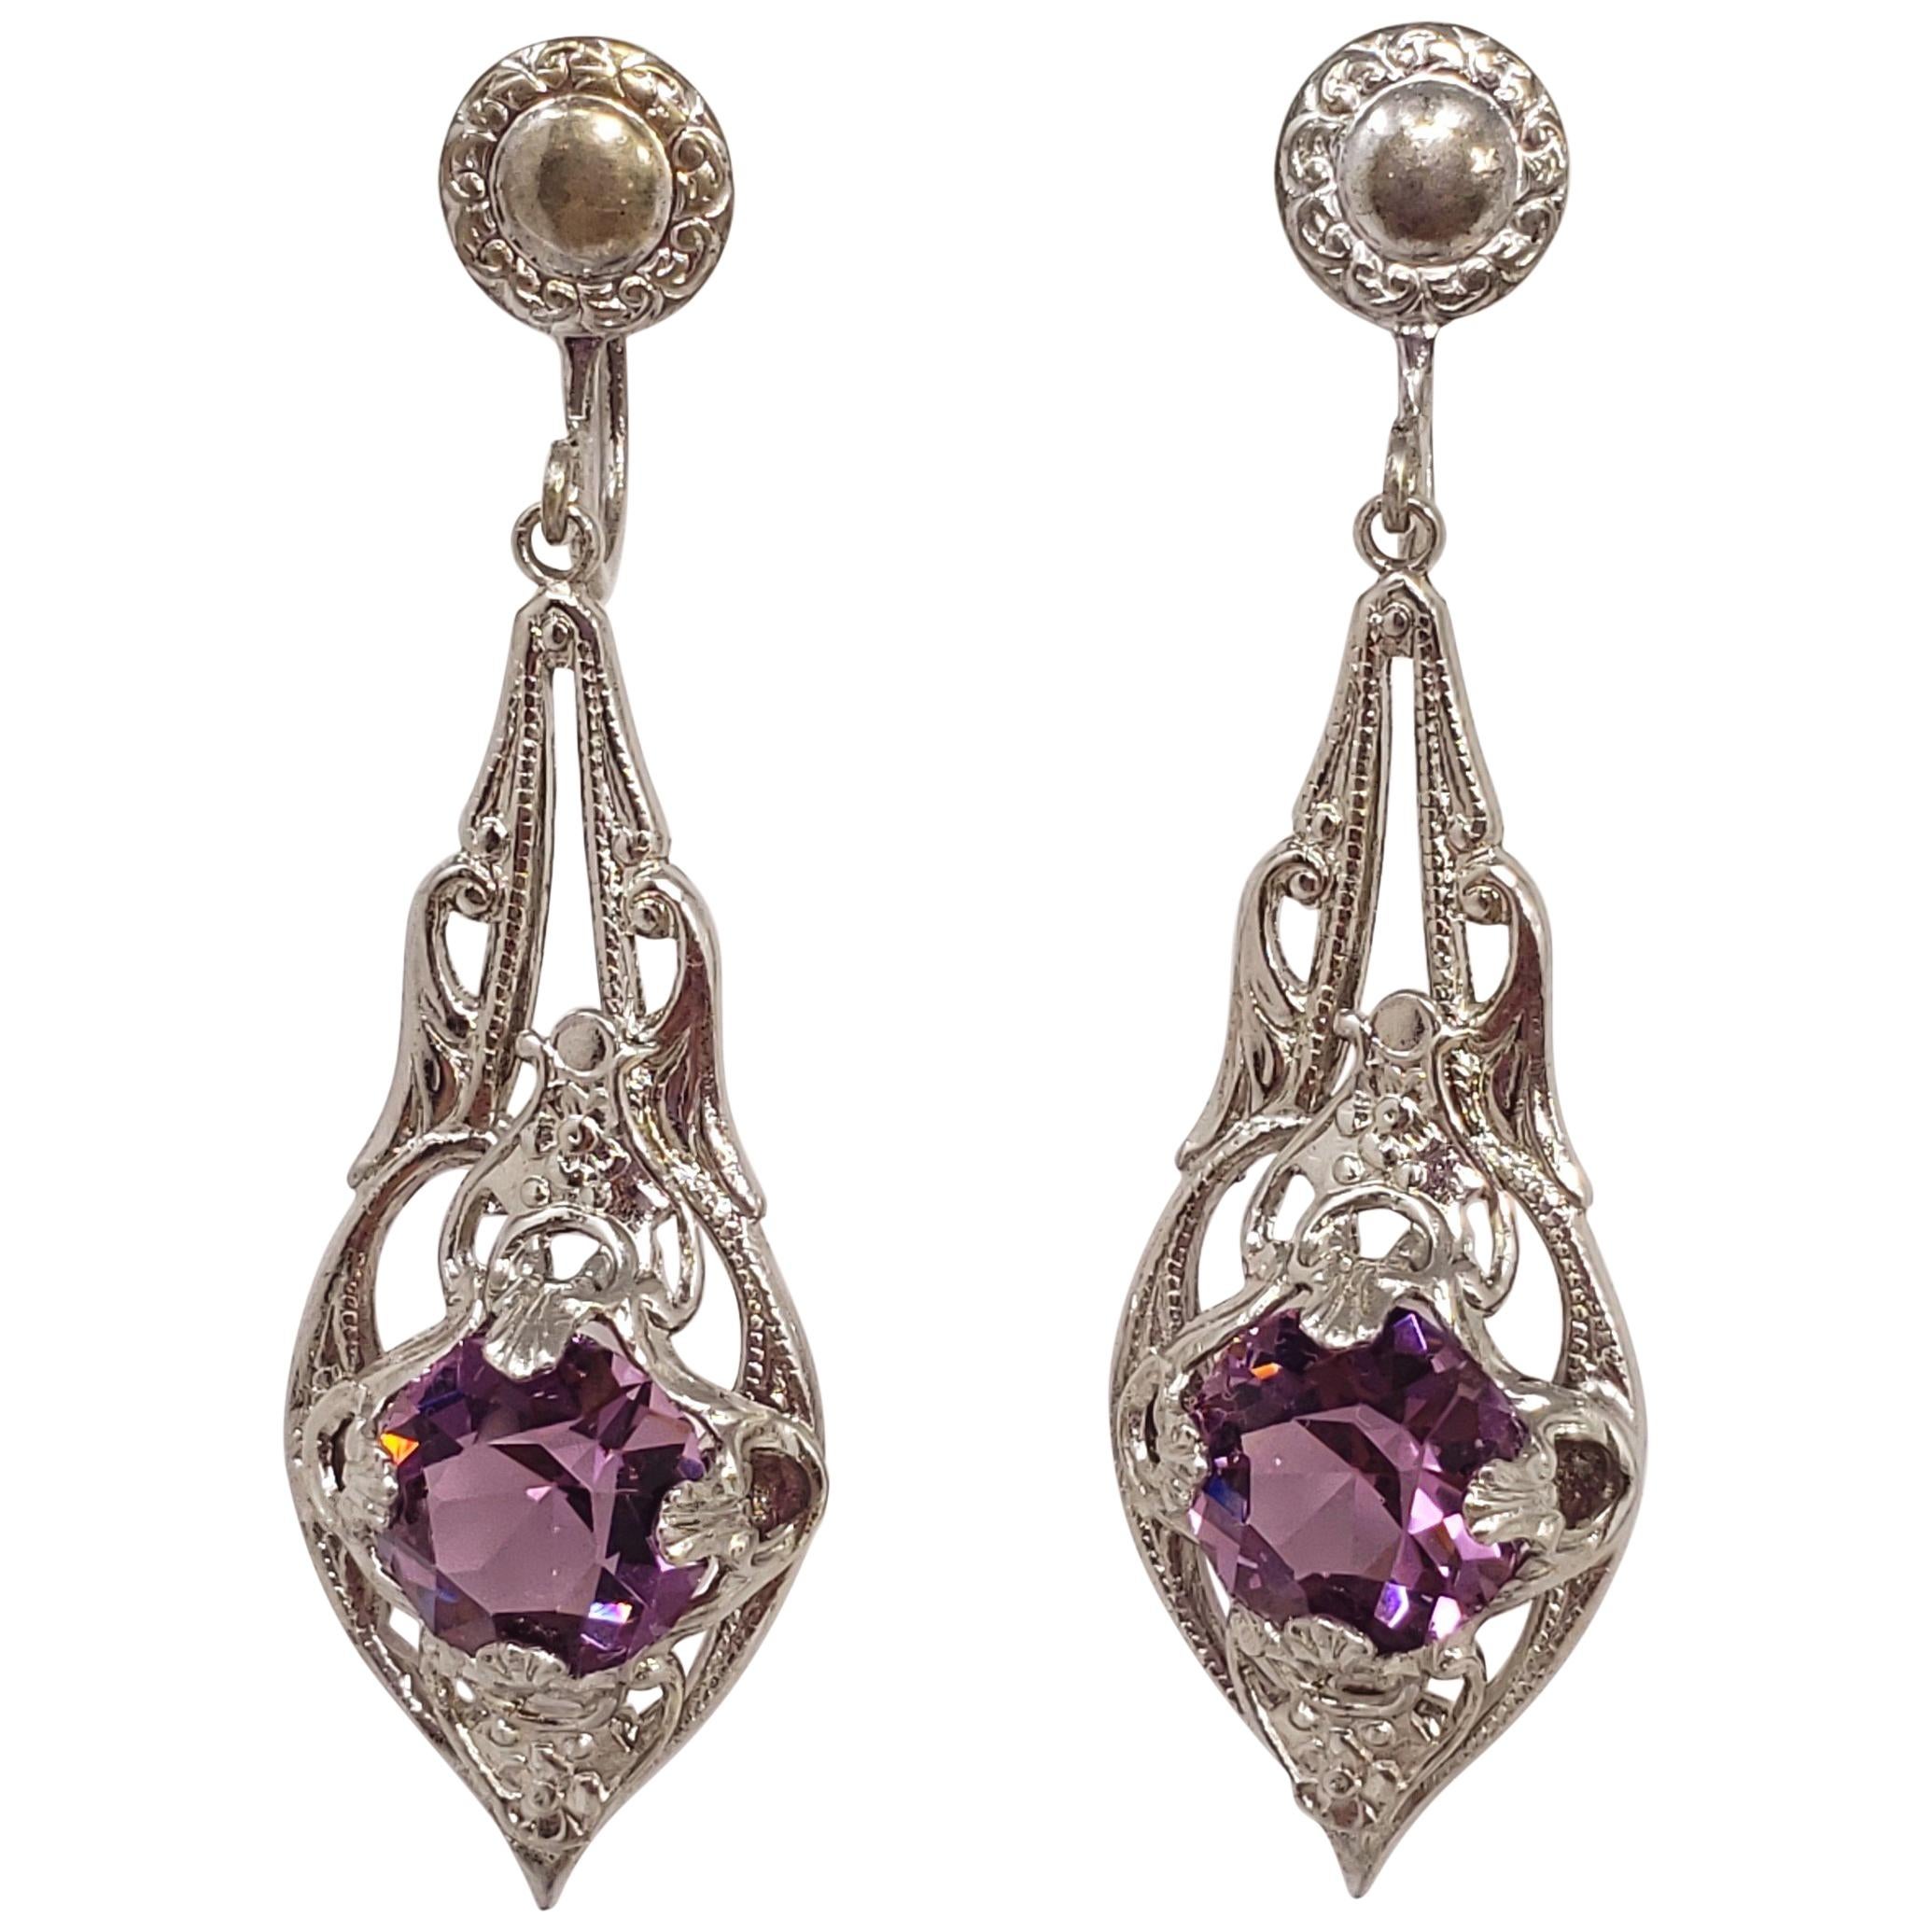 Antique Victorian Art Nouveau Silver Plated Crystal Dangling Screwback Earrings